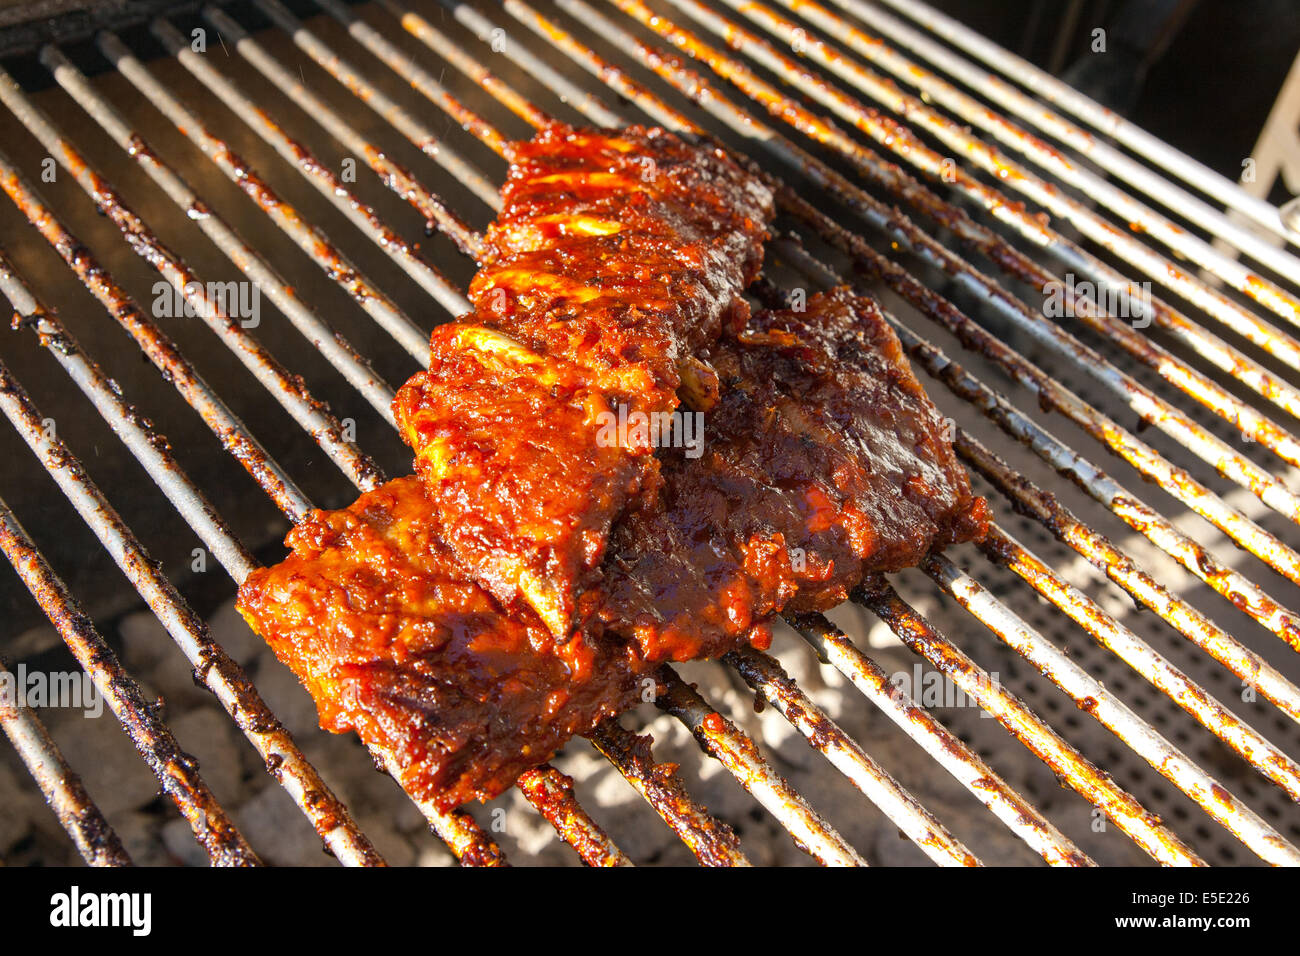 Fleisch High Resolution Stock Photography and Images - Alamy